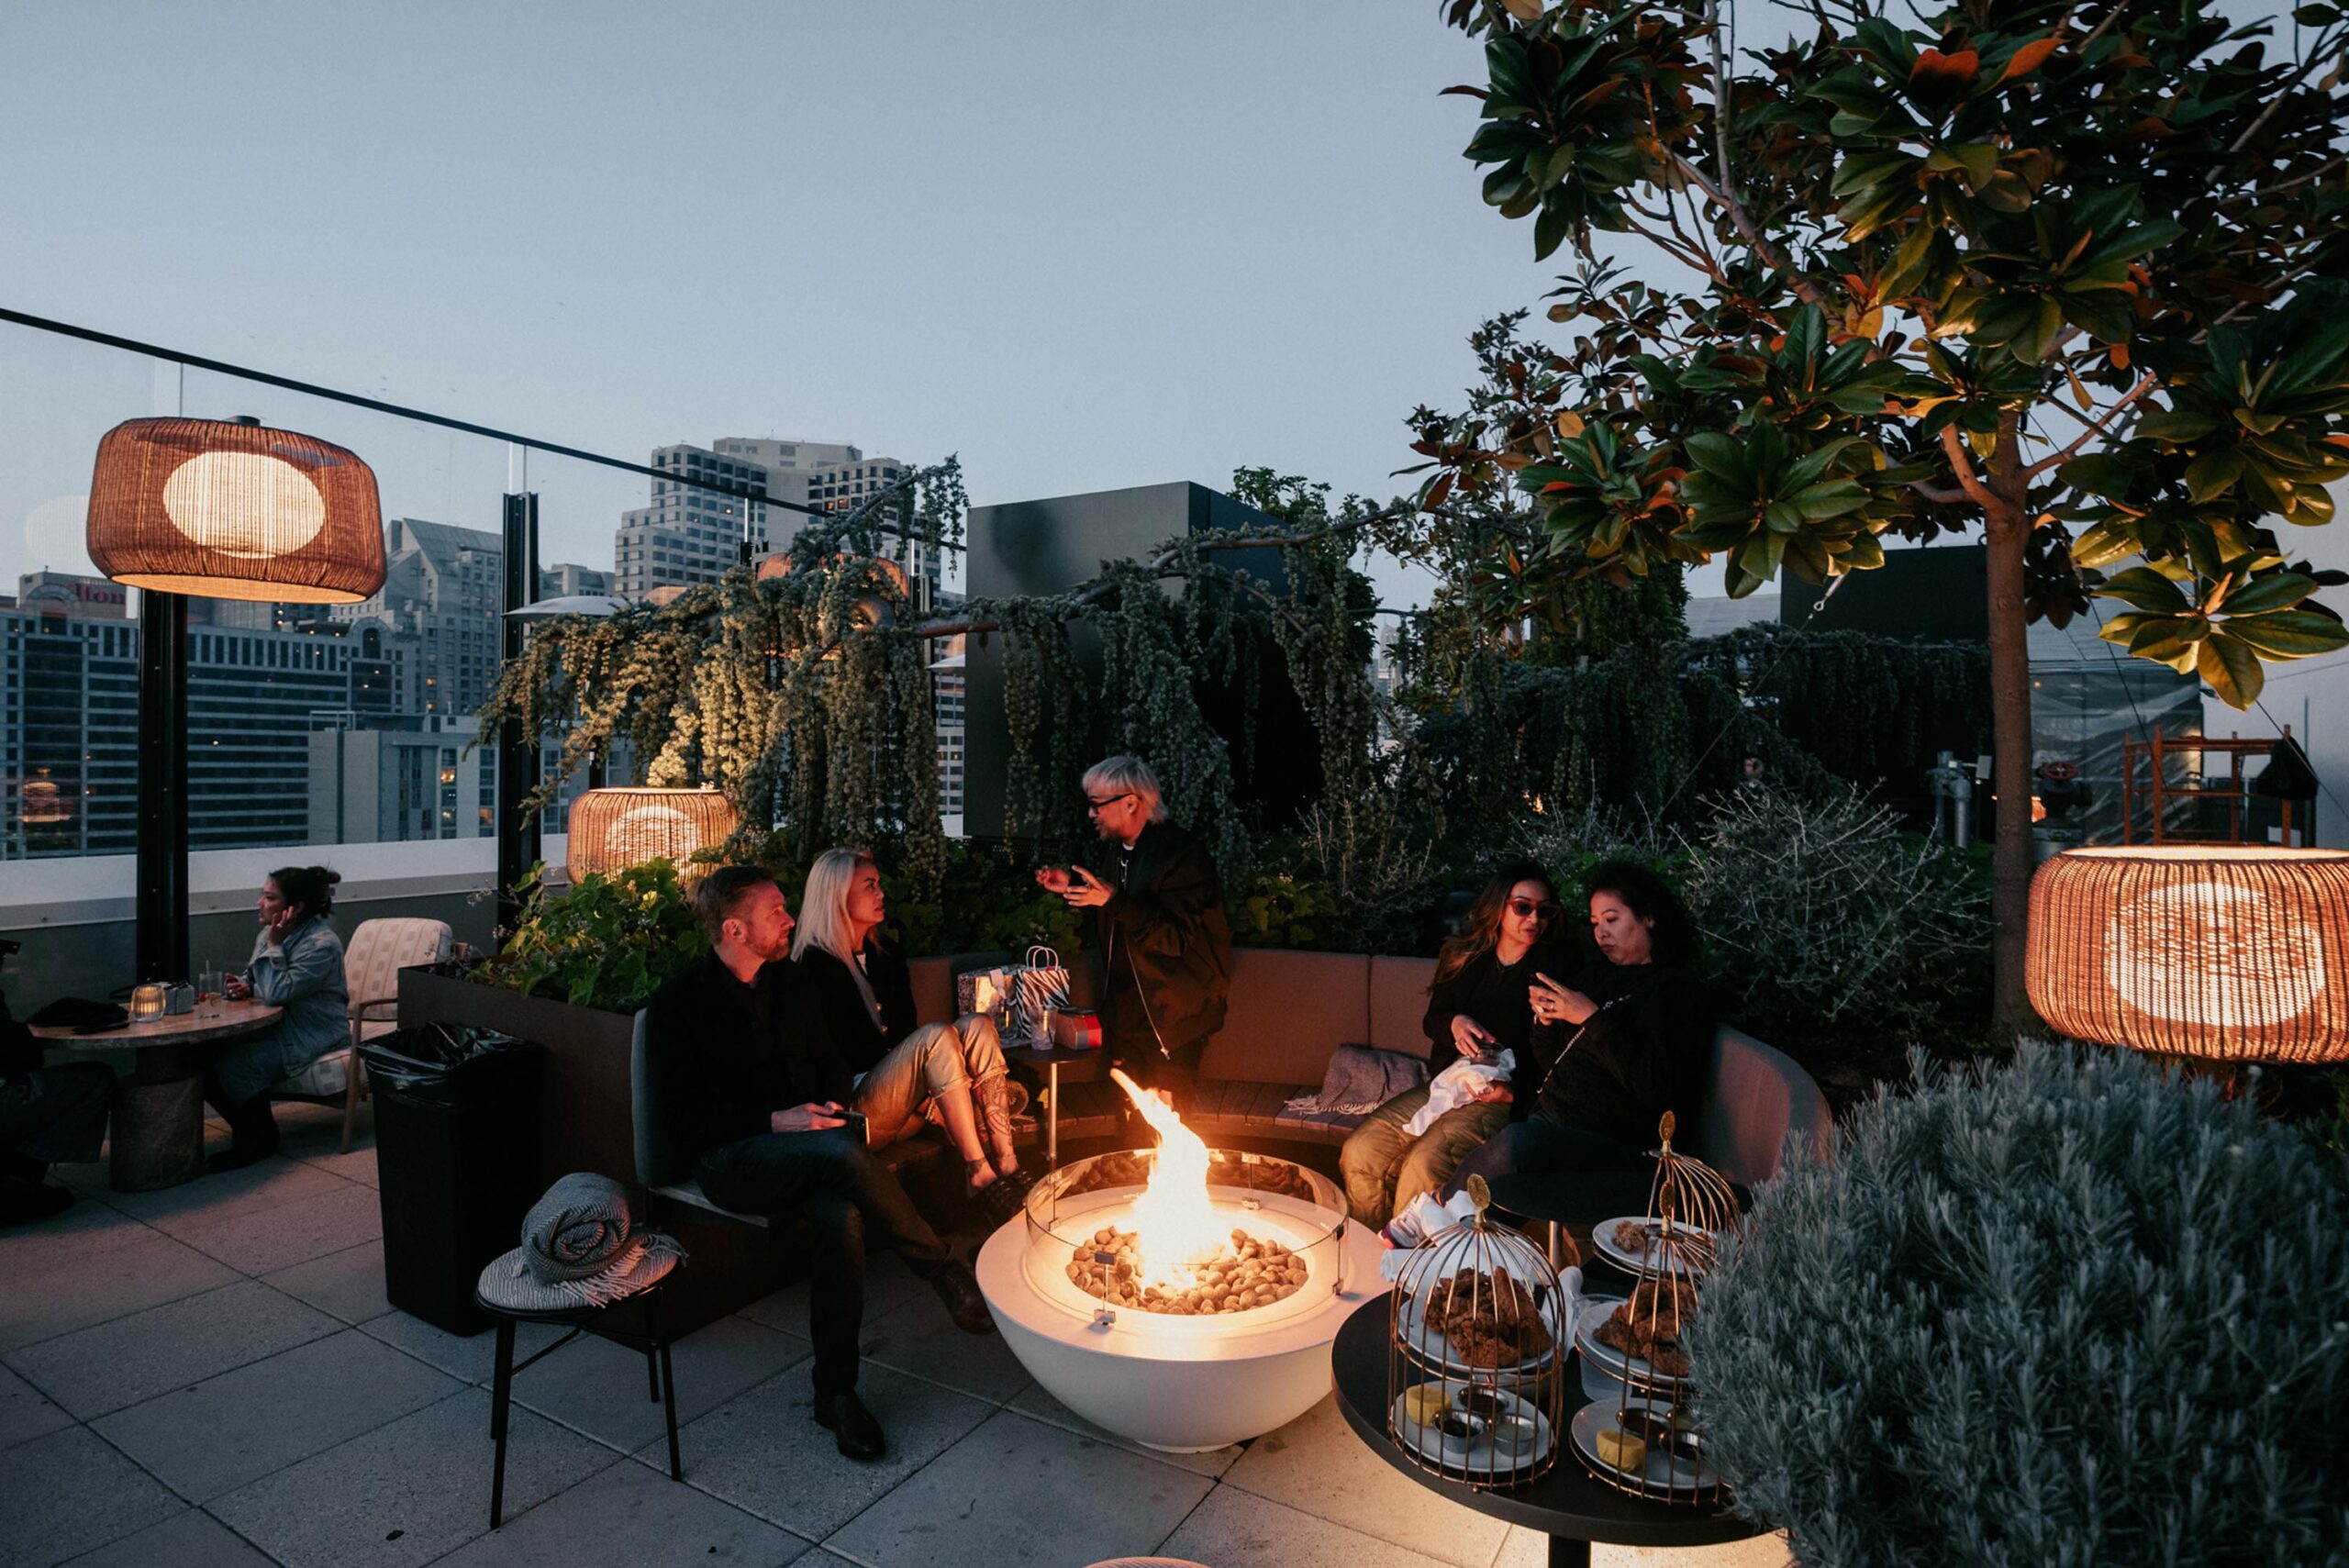 People savor snacks while seated near the rooftop bonfire.